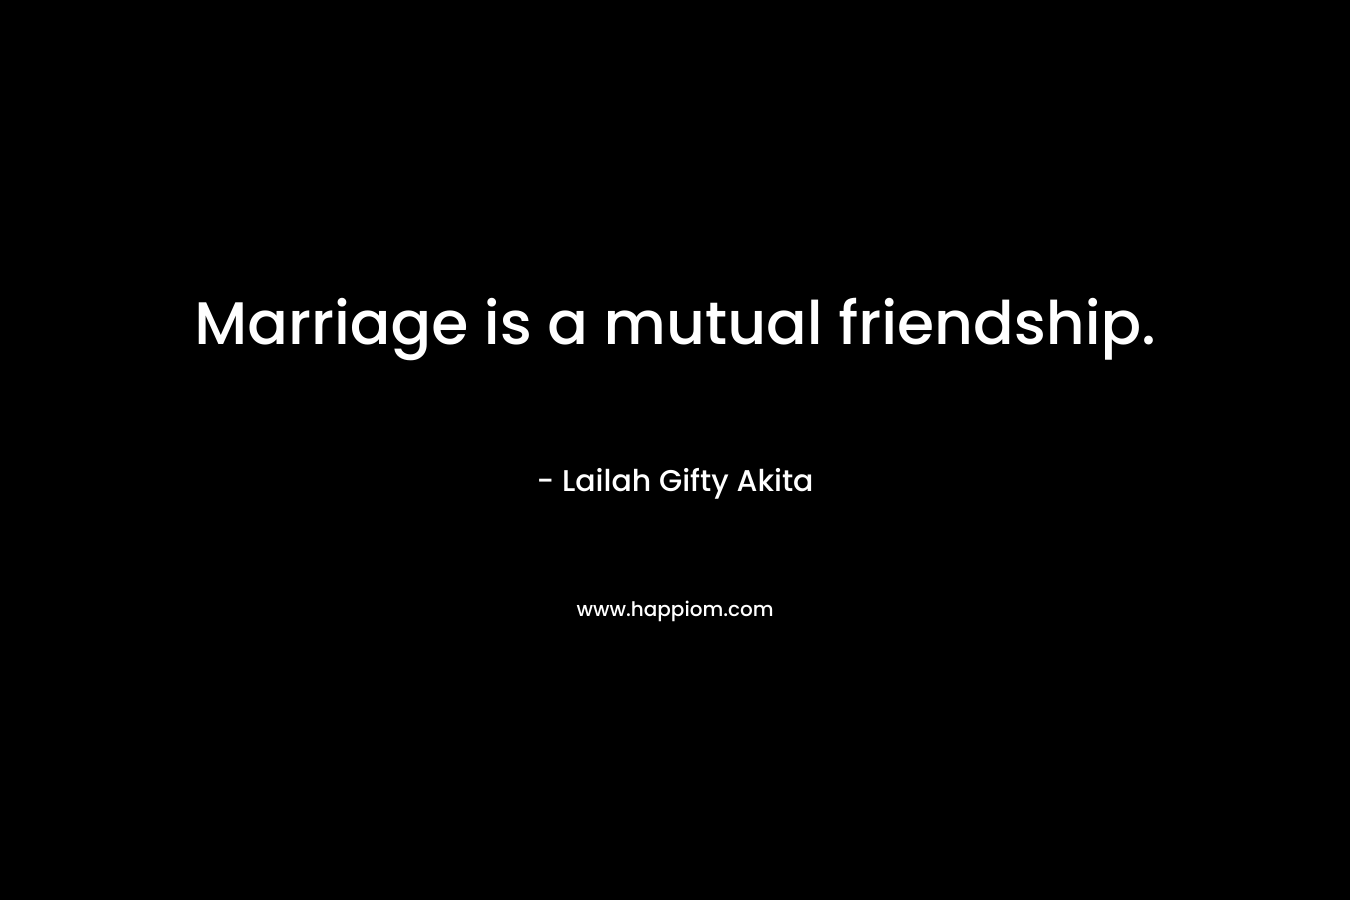 Marriage is a mutual friendship.